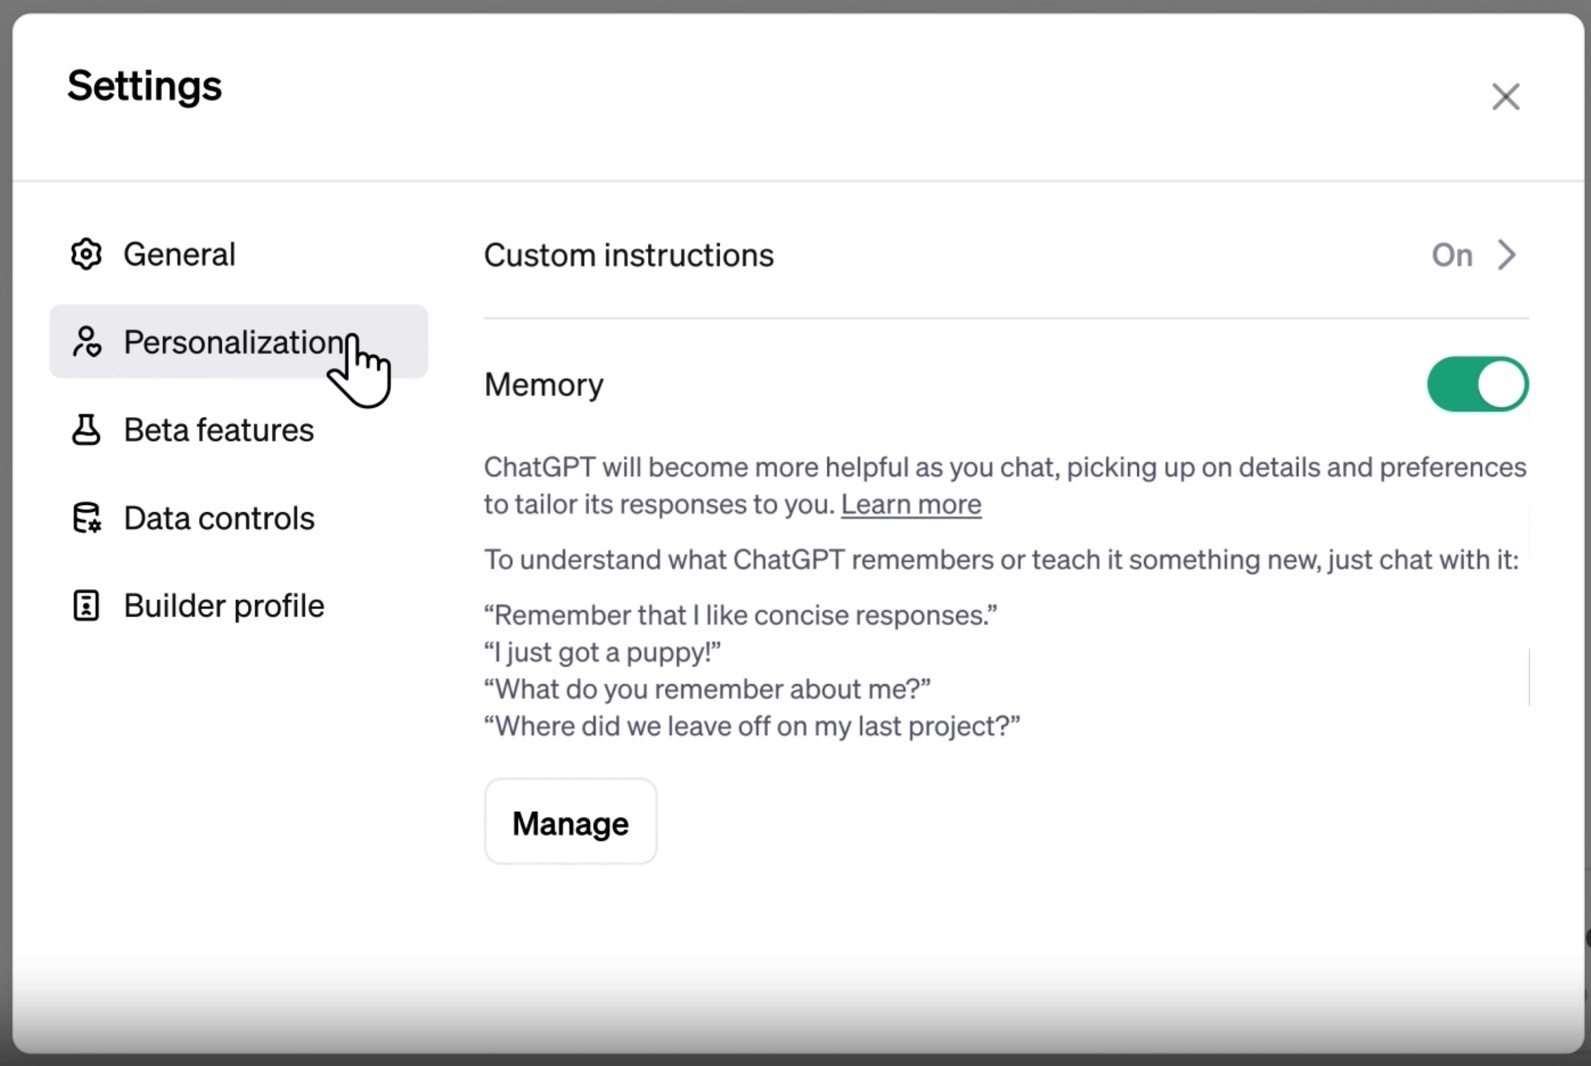 The new Personalization menu contain Memory settings for ChatGPT.